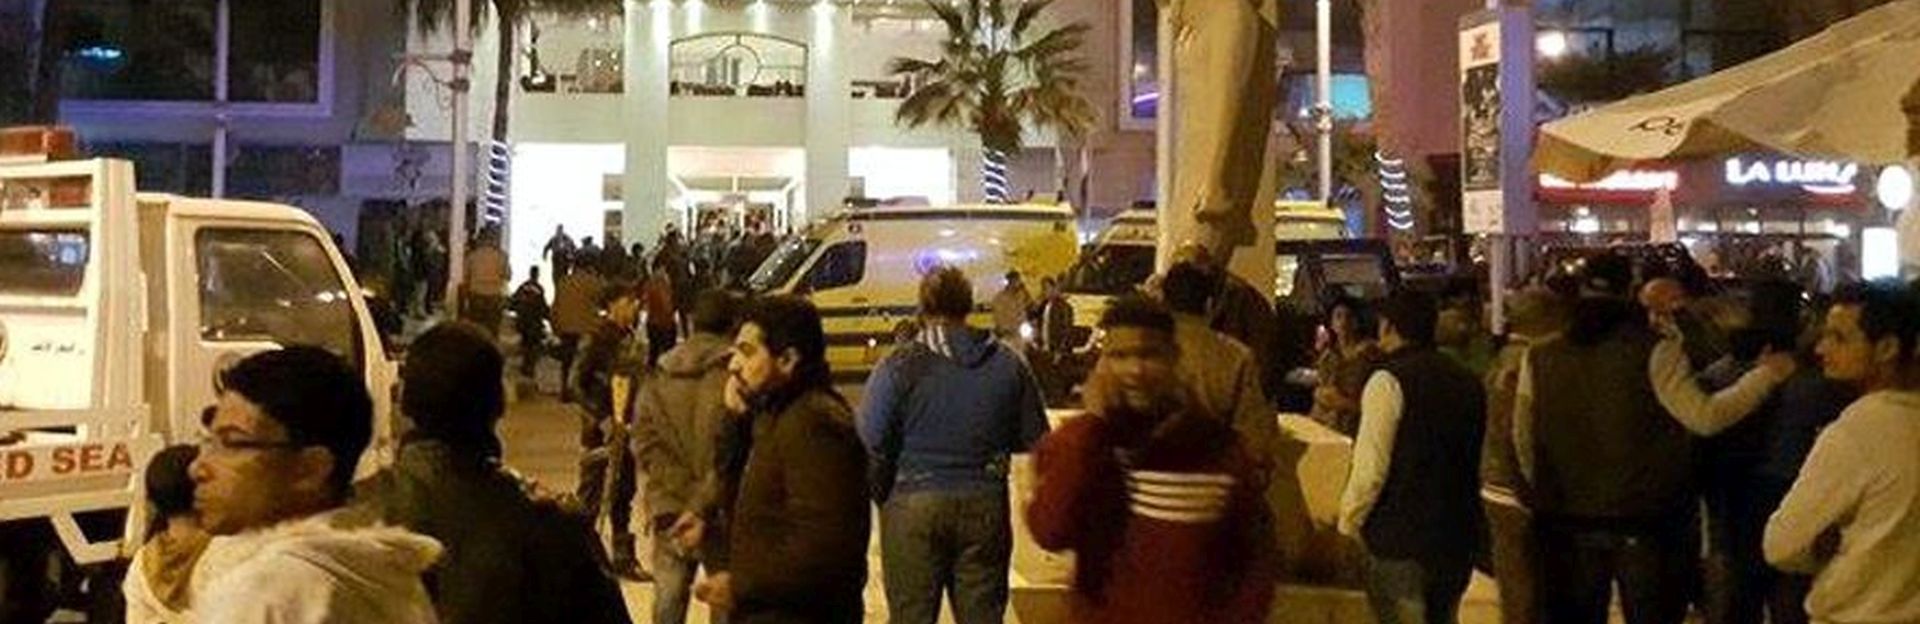 epa05093265 Egyptian security services outside the entrance to the Bella Vista Hotel in the Red Sea resort of Hurghada, Egypt, 08 January 2016. Gunmen opened fire on the hotel in the injuring two foreign tourists media reports state.  EPA/STRINGER